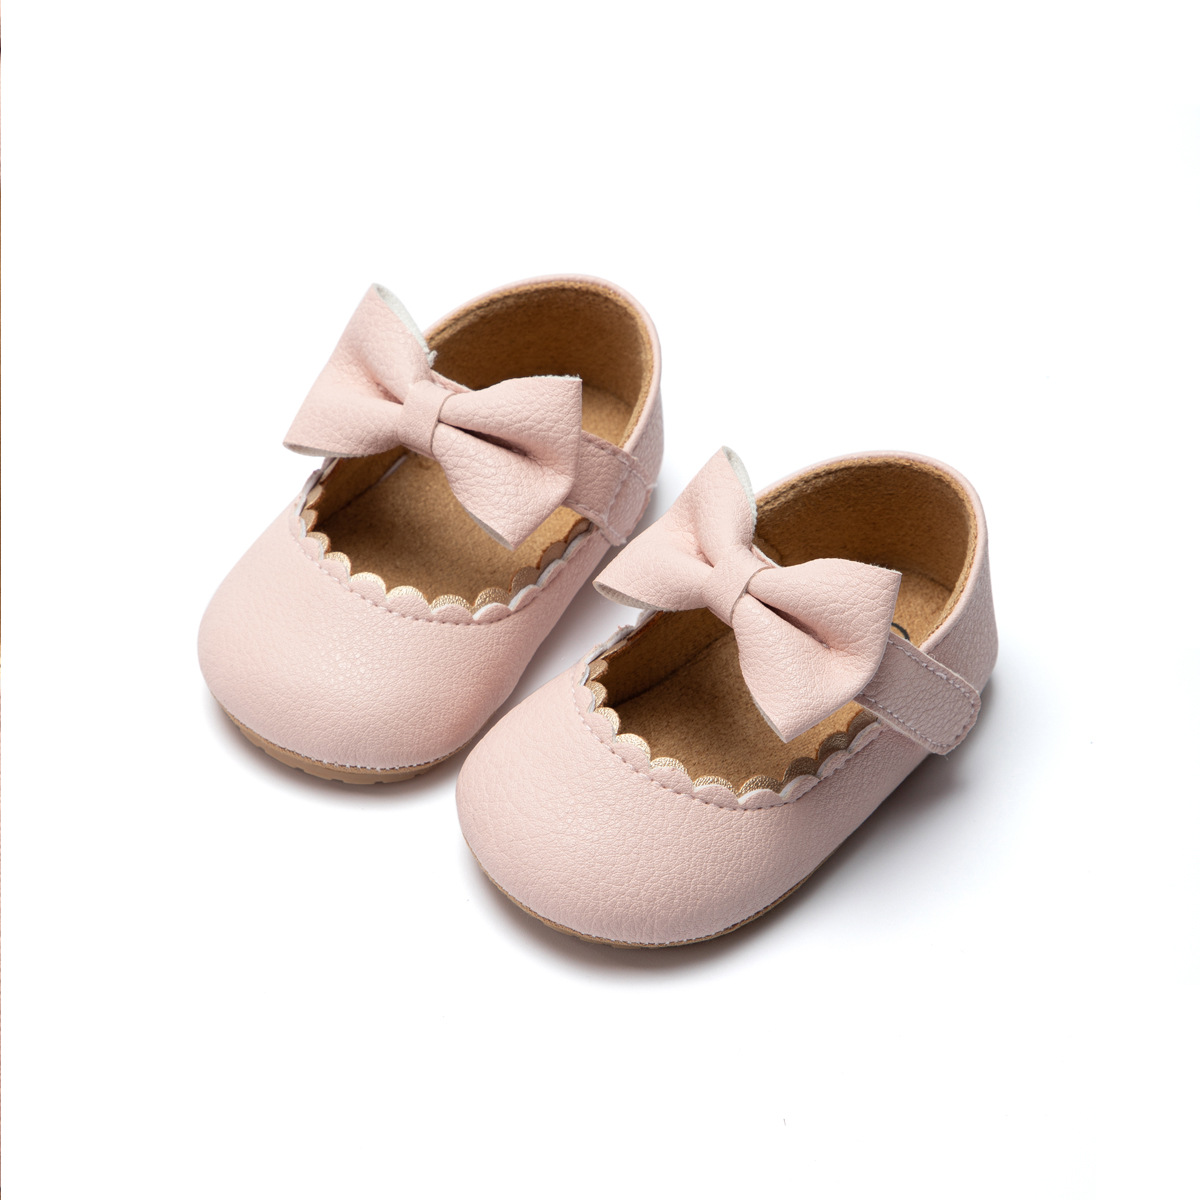 Butterfly Baby Shoes Rubber Soled Non-slip Toddler Shoes